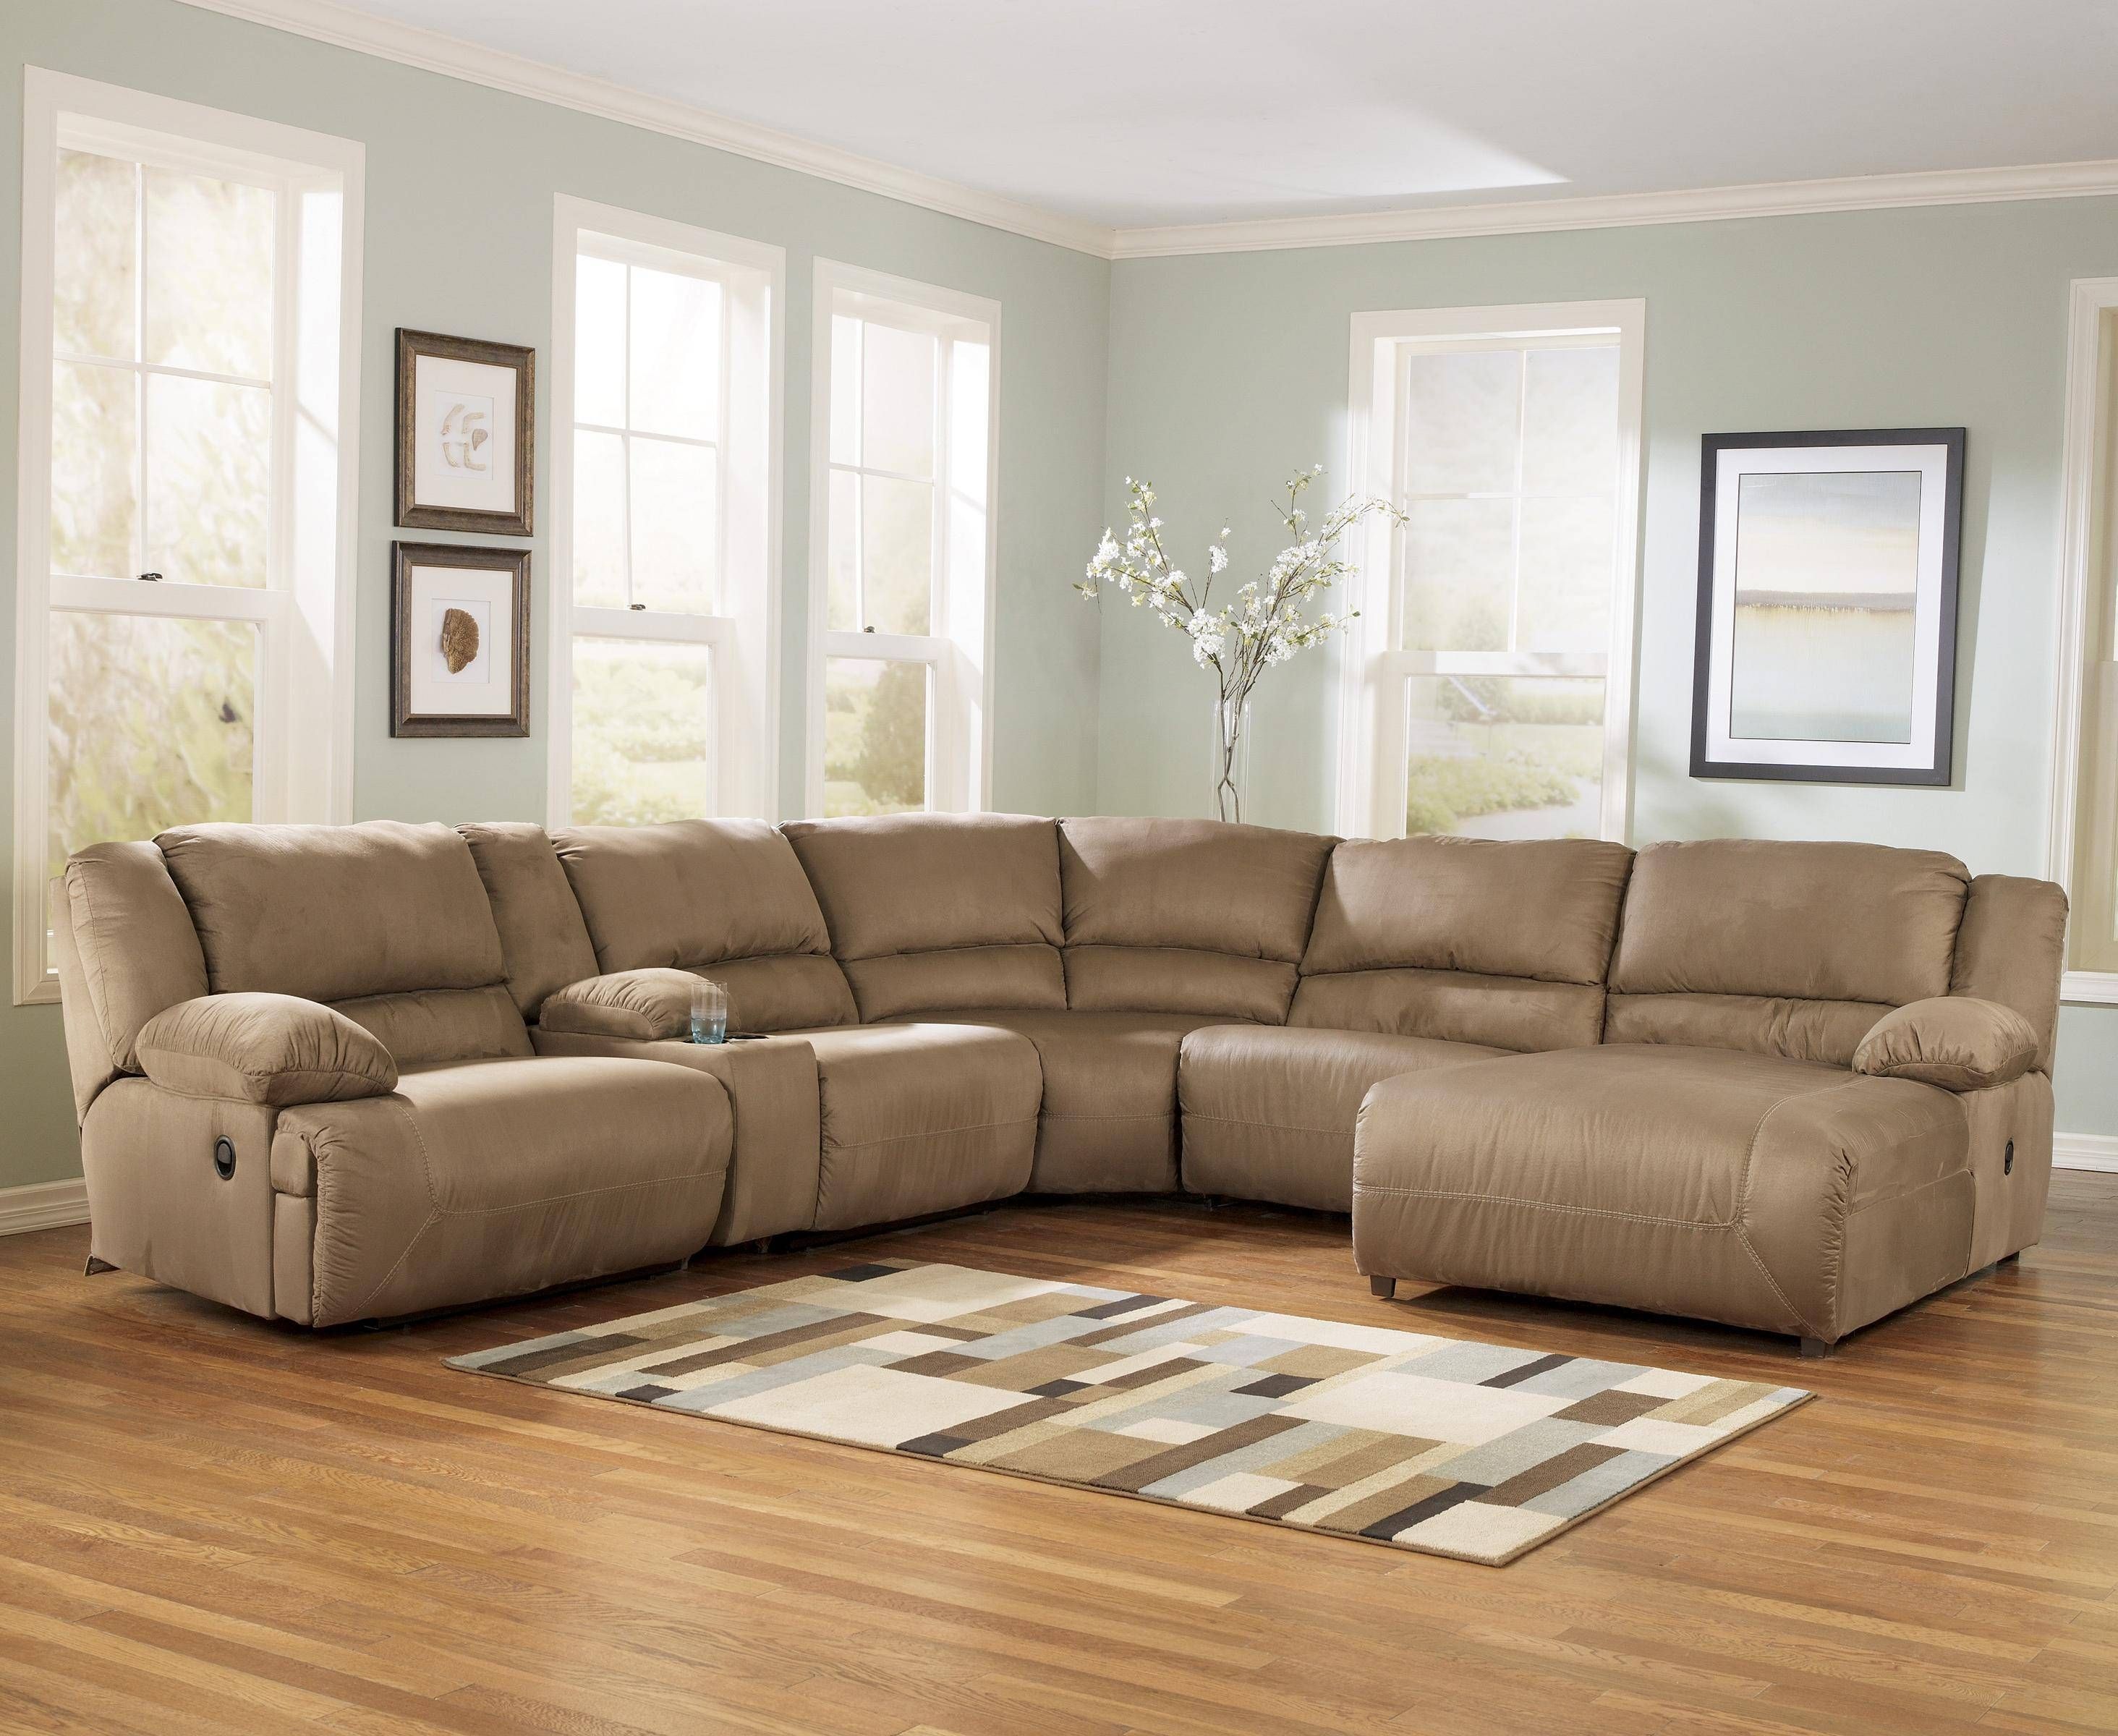 Signature Designashley Hogan – Mocha 6 Piece Motion Sectional Inside 6 Piece Sectional Sofas Couches (View 2 of 15)